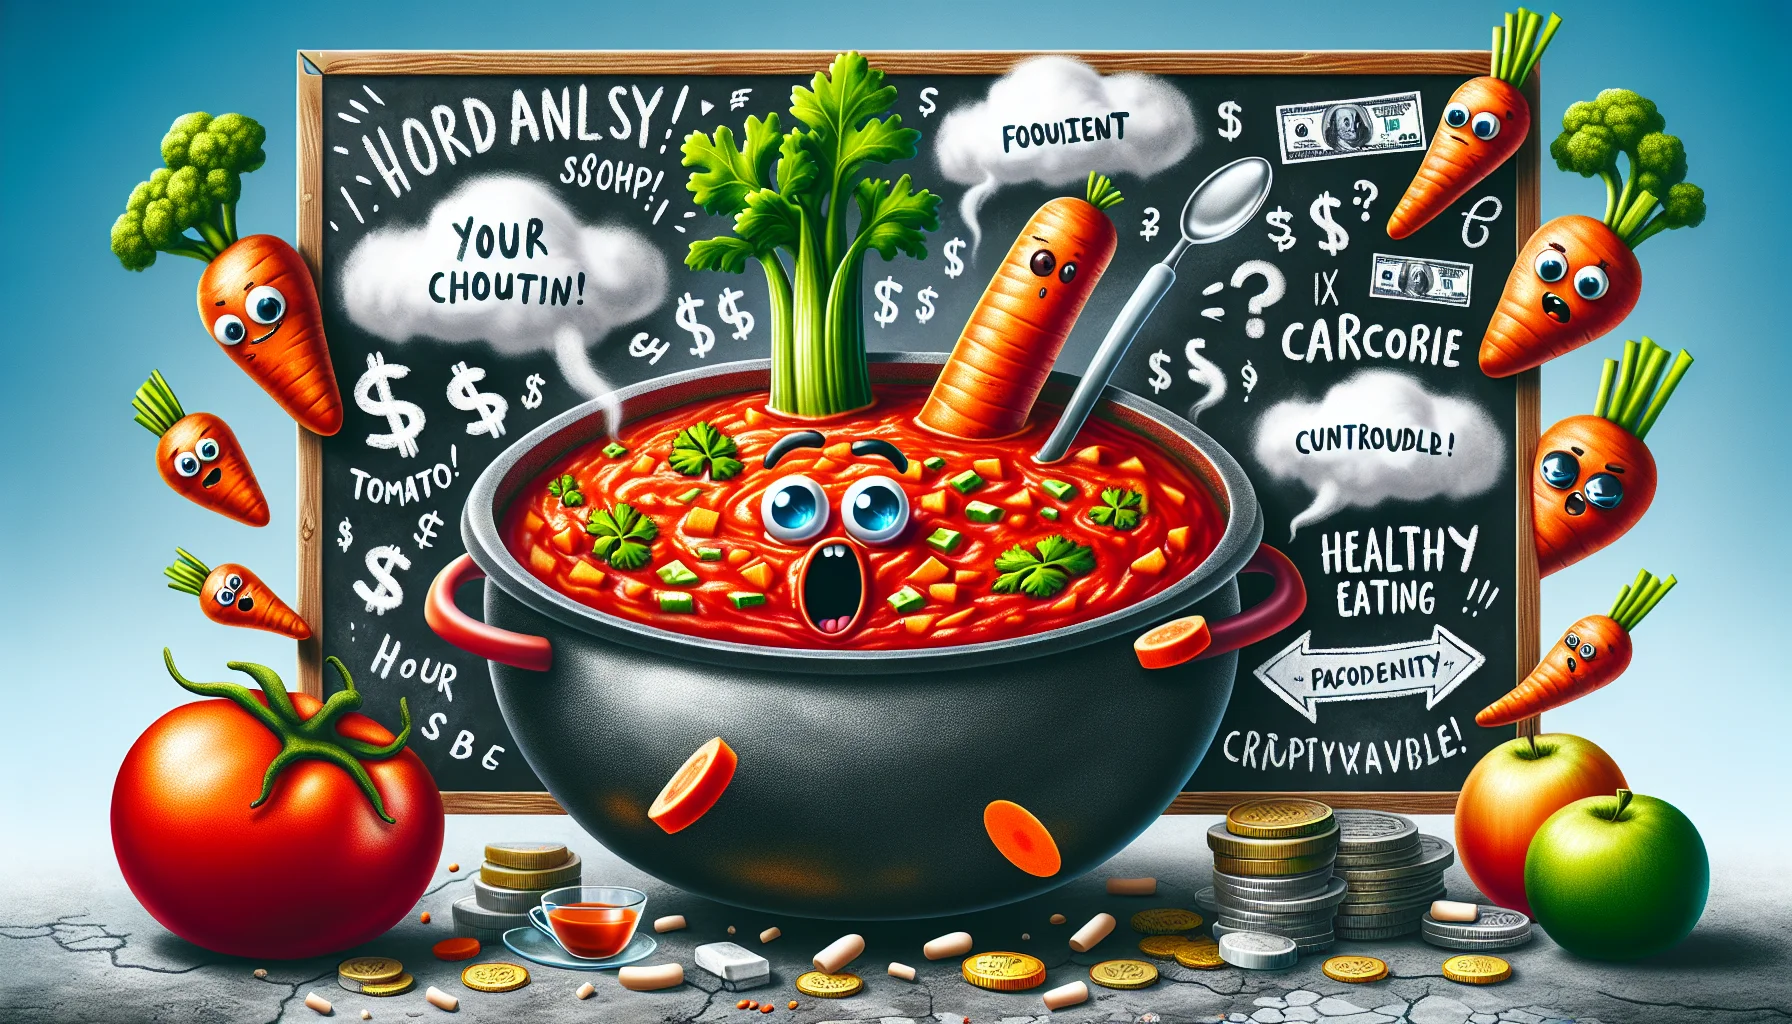 Depict a humorous scenario of a large, vividly colored and chunky tomato soup simmering in a pot. Floating in the soup are oversized carrot and celery sticks wearing small cartoonish faces, looking surprised yet ecstatic at the scrumptious whirlpool they are in. Nearby, display a chalkboard where creative and funny handwritten chalk messages promote the benefits of healthy eating and the affordability of the recipe. Show different currencies and small illustrations that represent worldwide cultures around the chalkboard, reflecting the universality and accessibility of healthy eating.